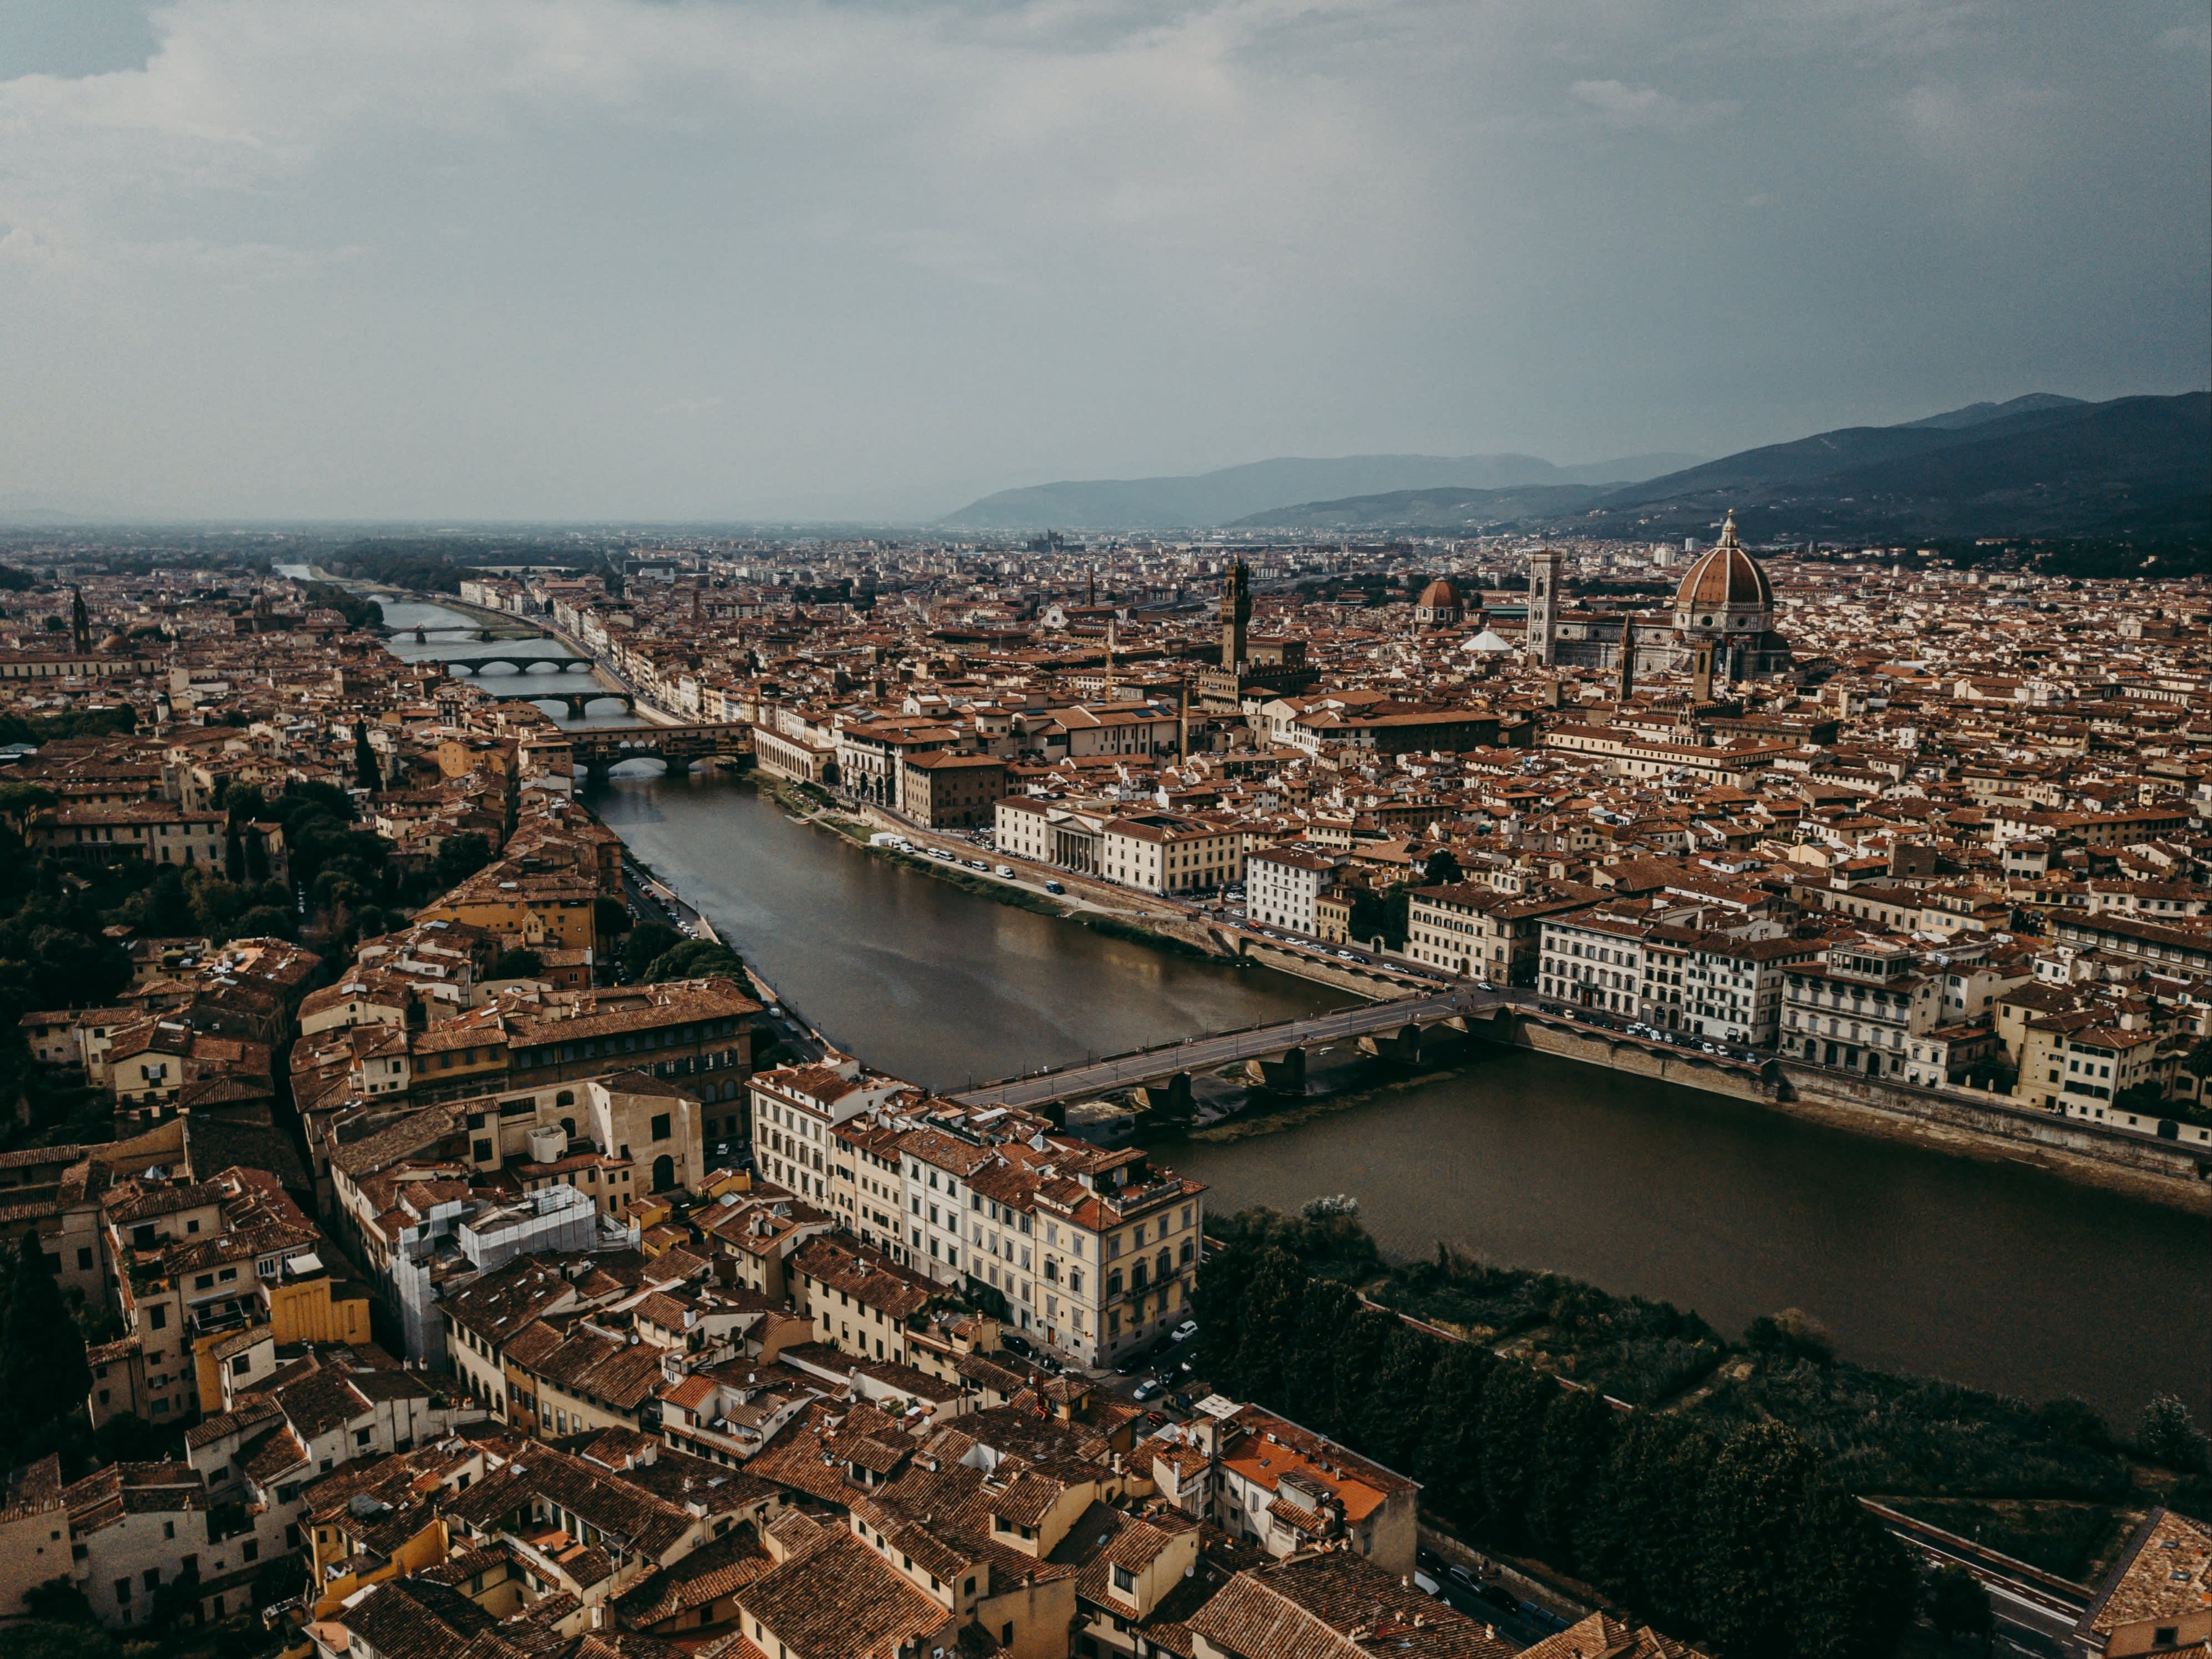 A picture of Florence from a bird's eye view showing both sides of the city, the Cathedral of Santa Maria del Fiore and the Arno river